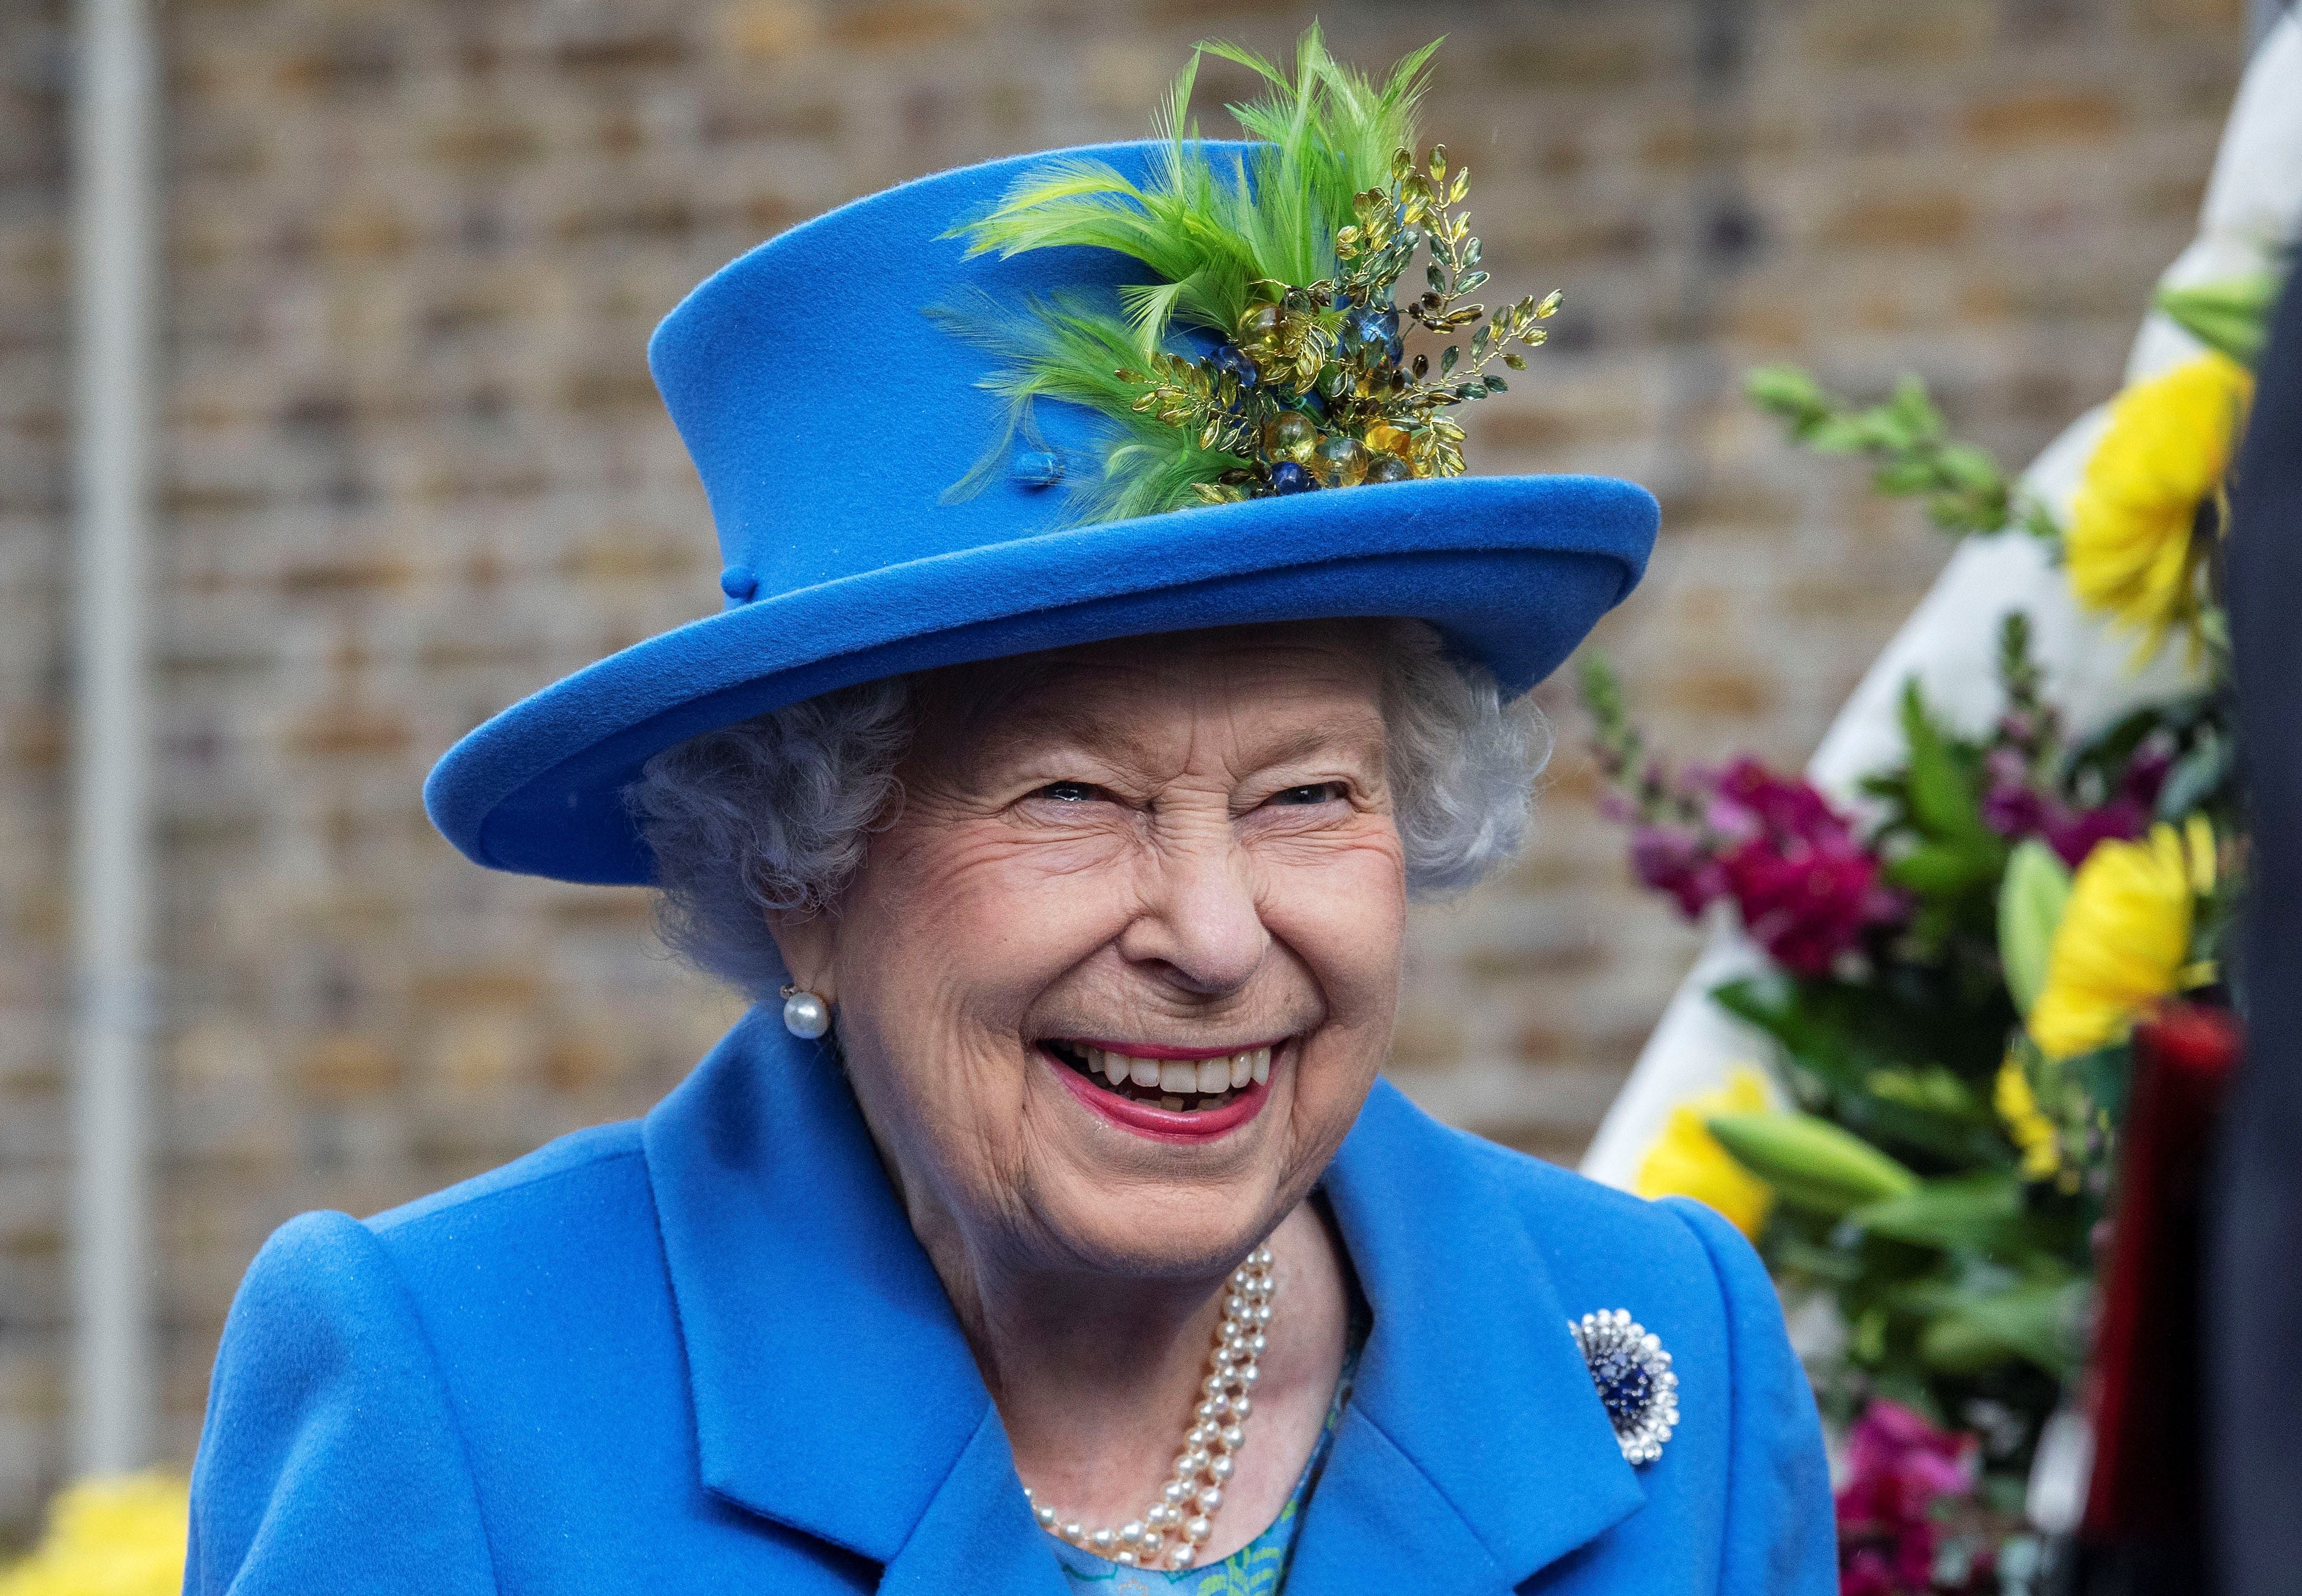 Queen Elizabeth II reacts as she visits the Haig Housing Trust in Morden in 2019